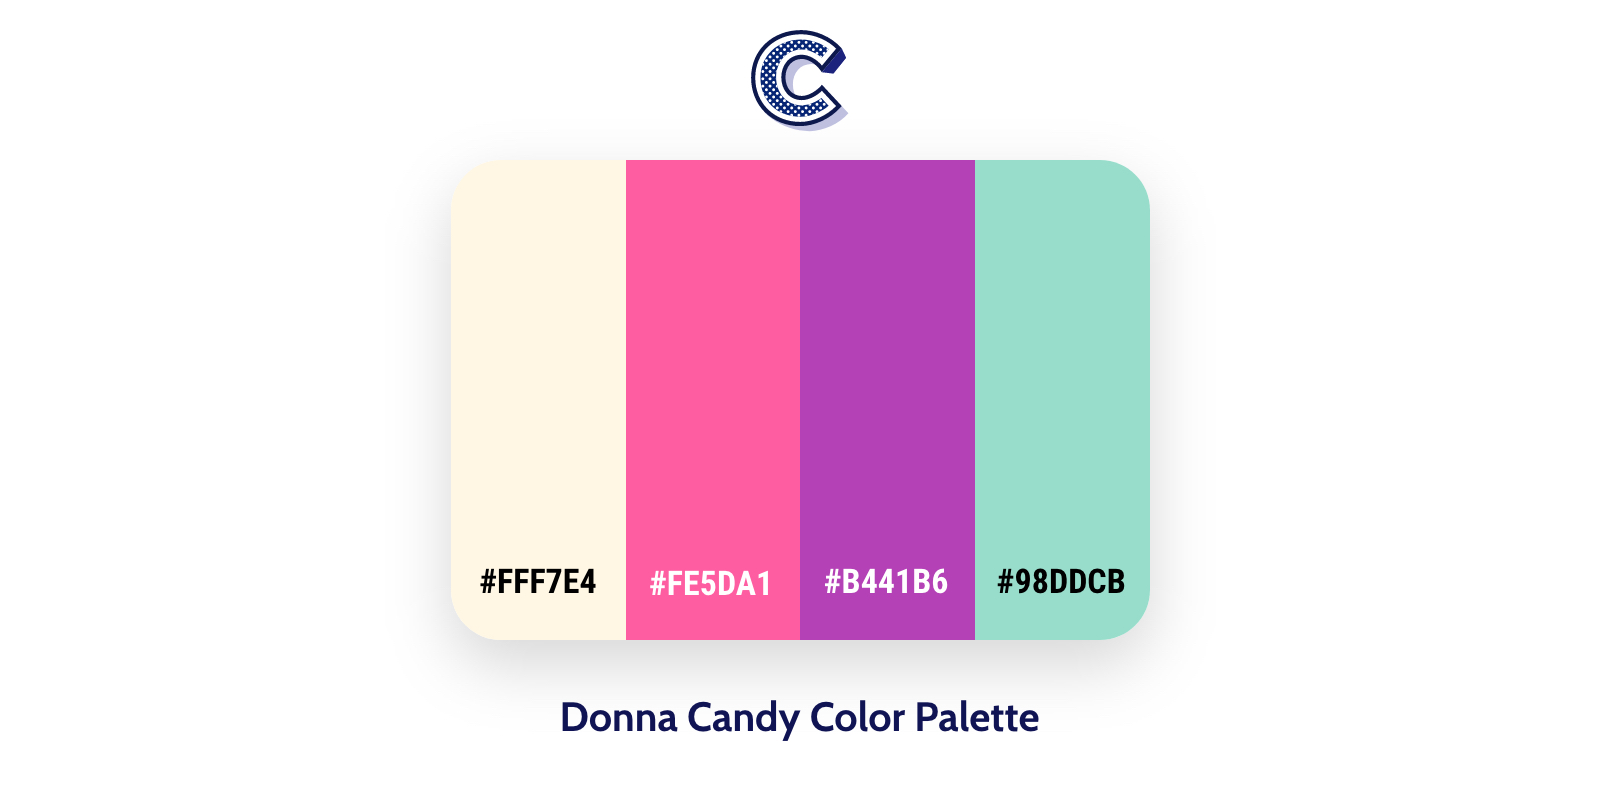 The featured image of donna candy color palette